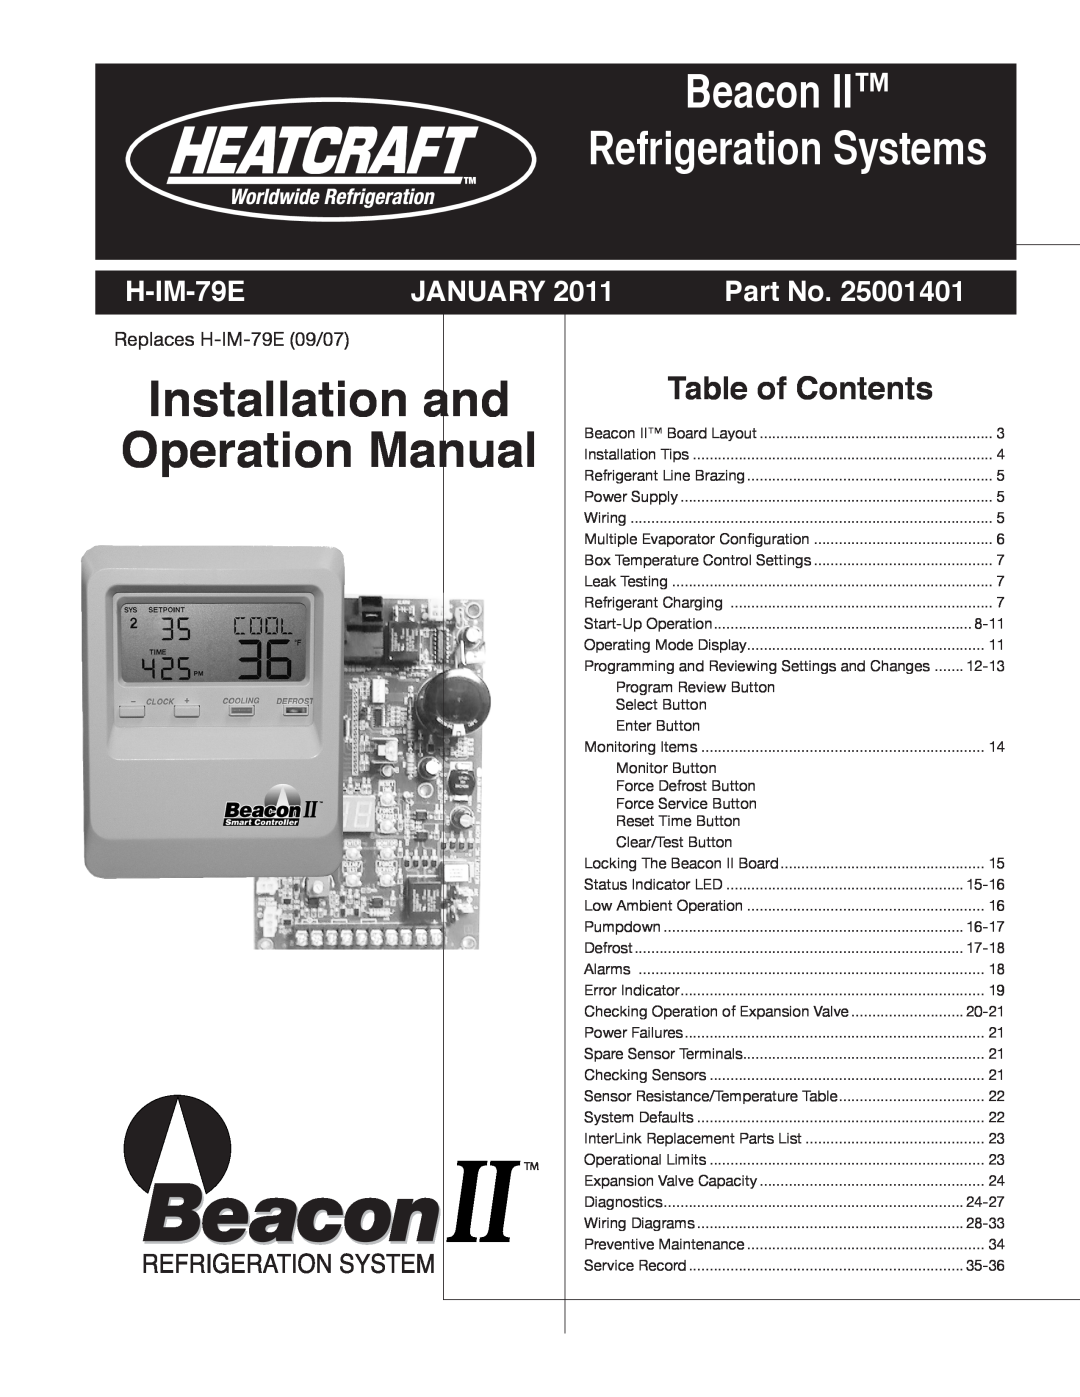 Heatcraft Refrigeration Products H-IM-79E manual Table of Contents, Installation and, Operation Manual, January, Part No 